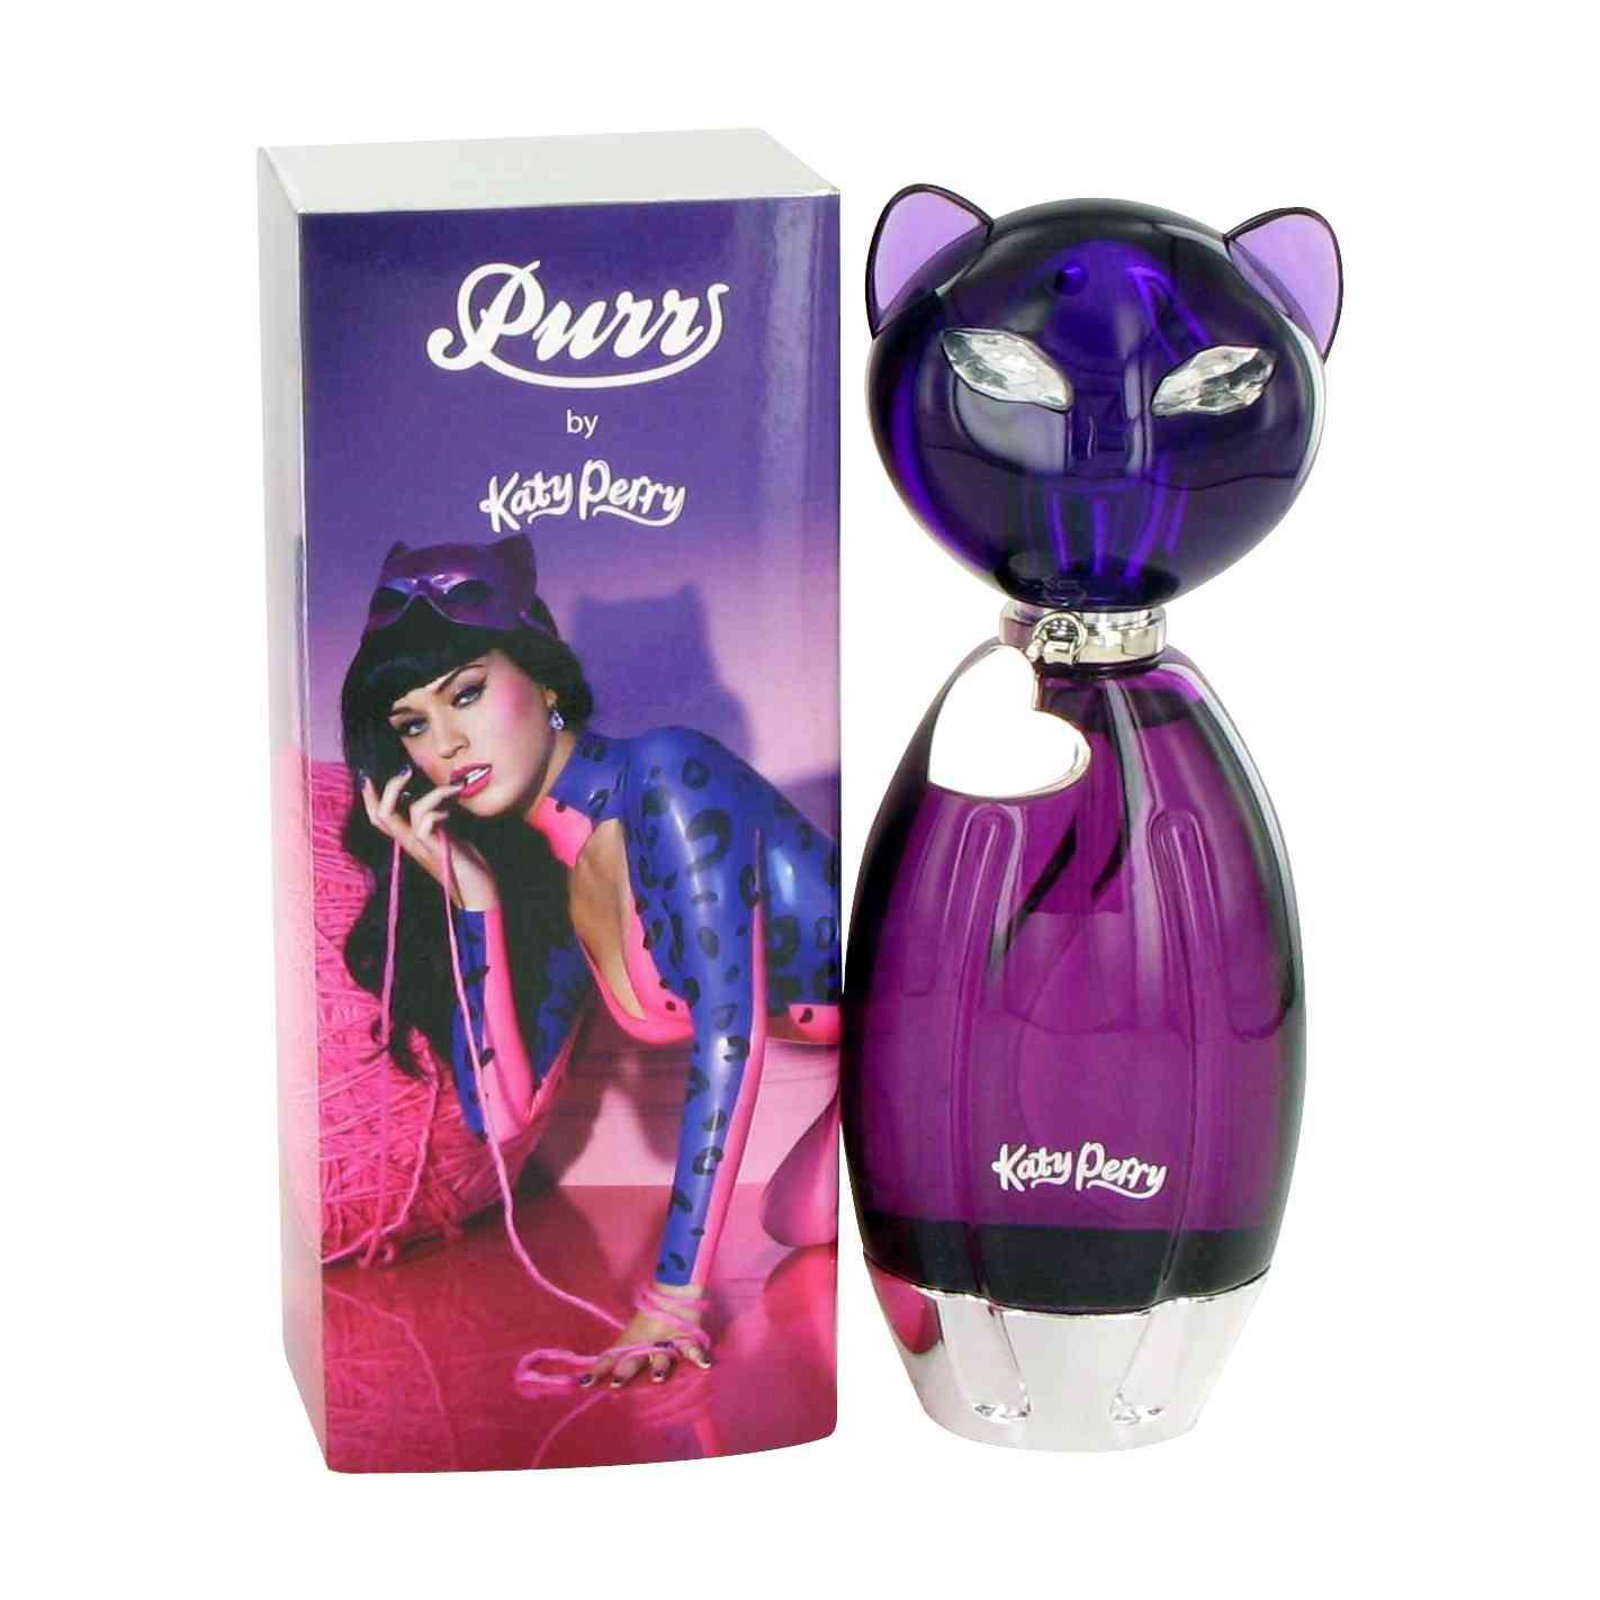 KATY PERRY PURR